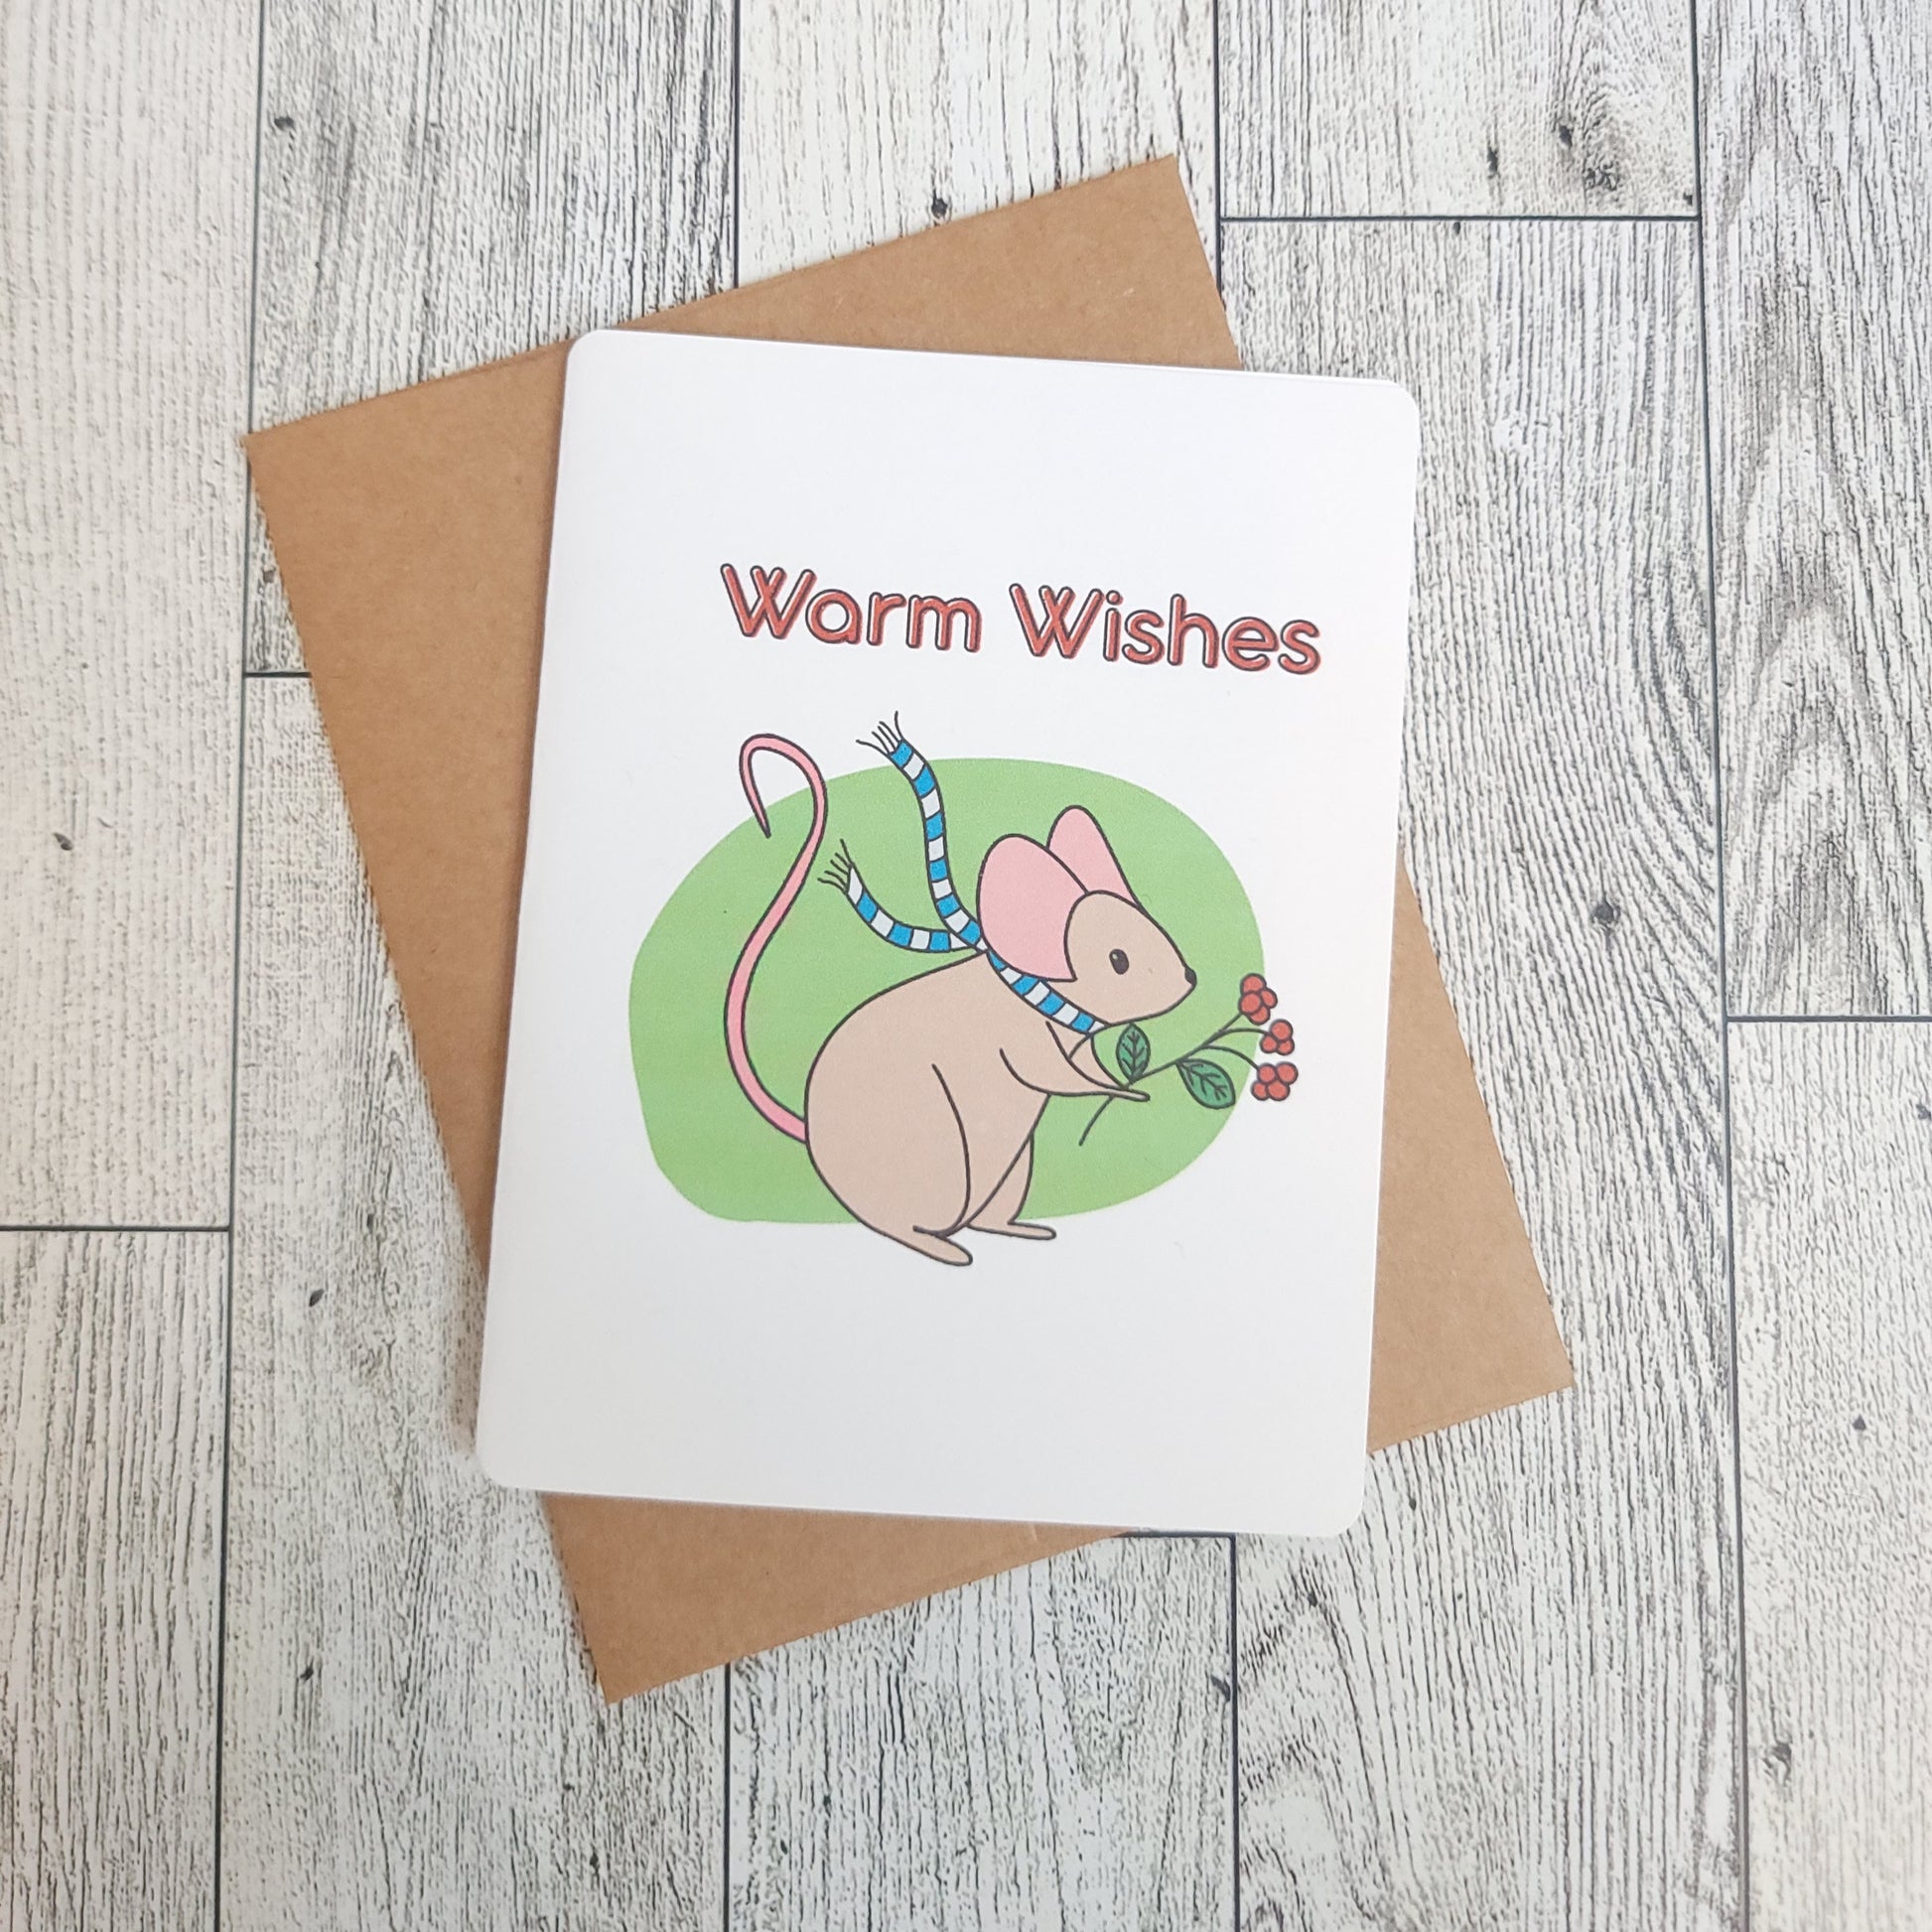 Warm Wishes Mouse Handmade Greeting Card - Recycled Paper and Kraft Envelop - Overhead Shot